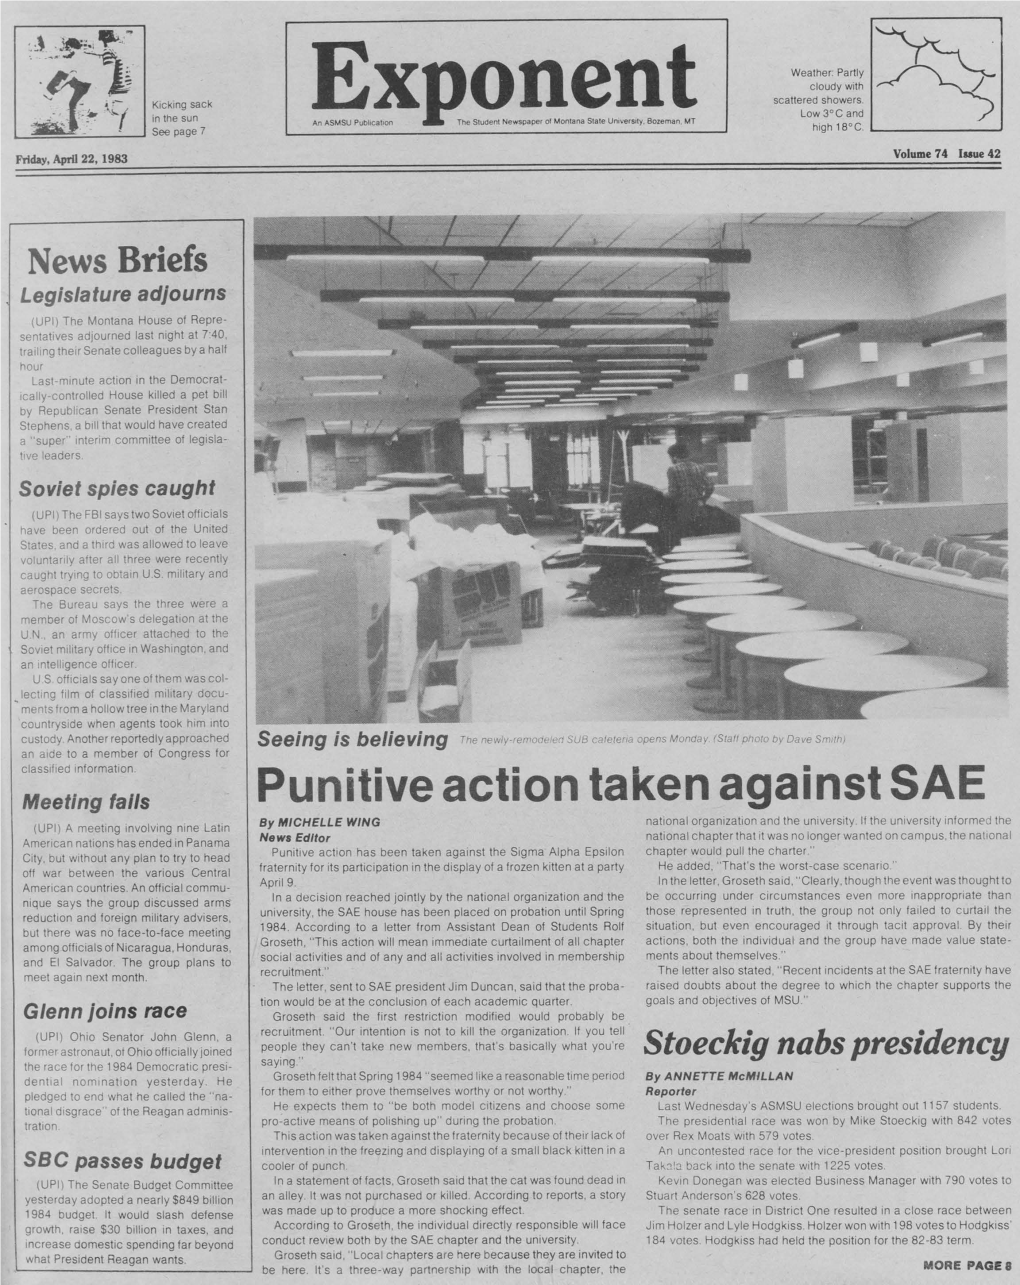 Punitive Action Taken Against SAE by MICHELLE WING National Organization and the University